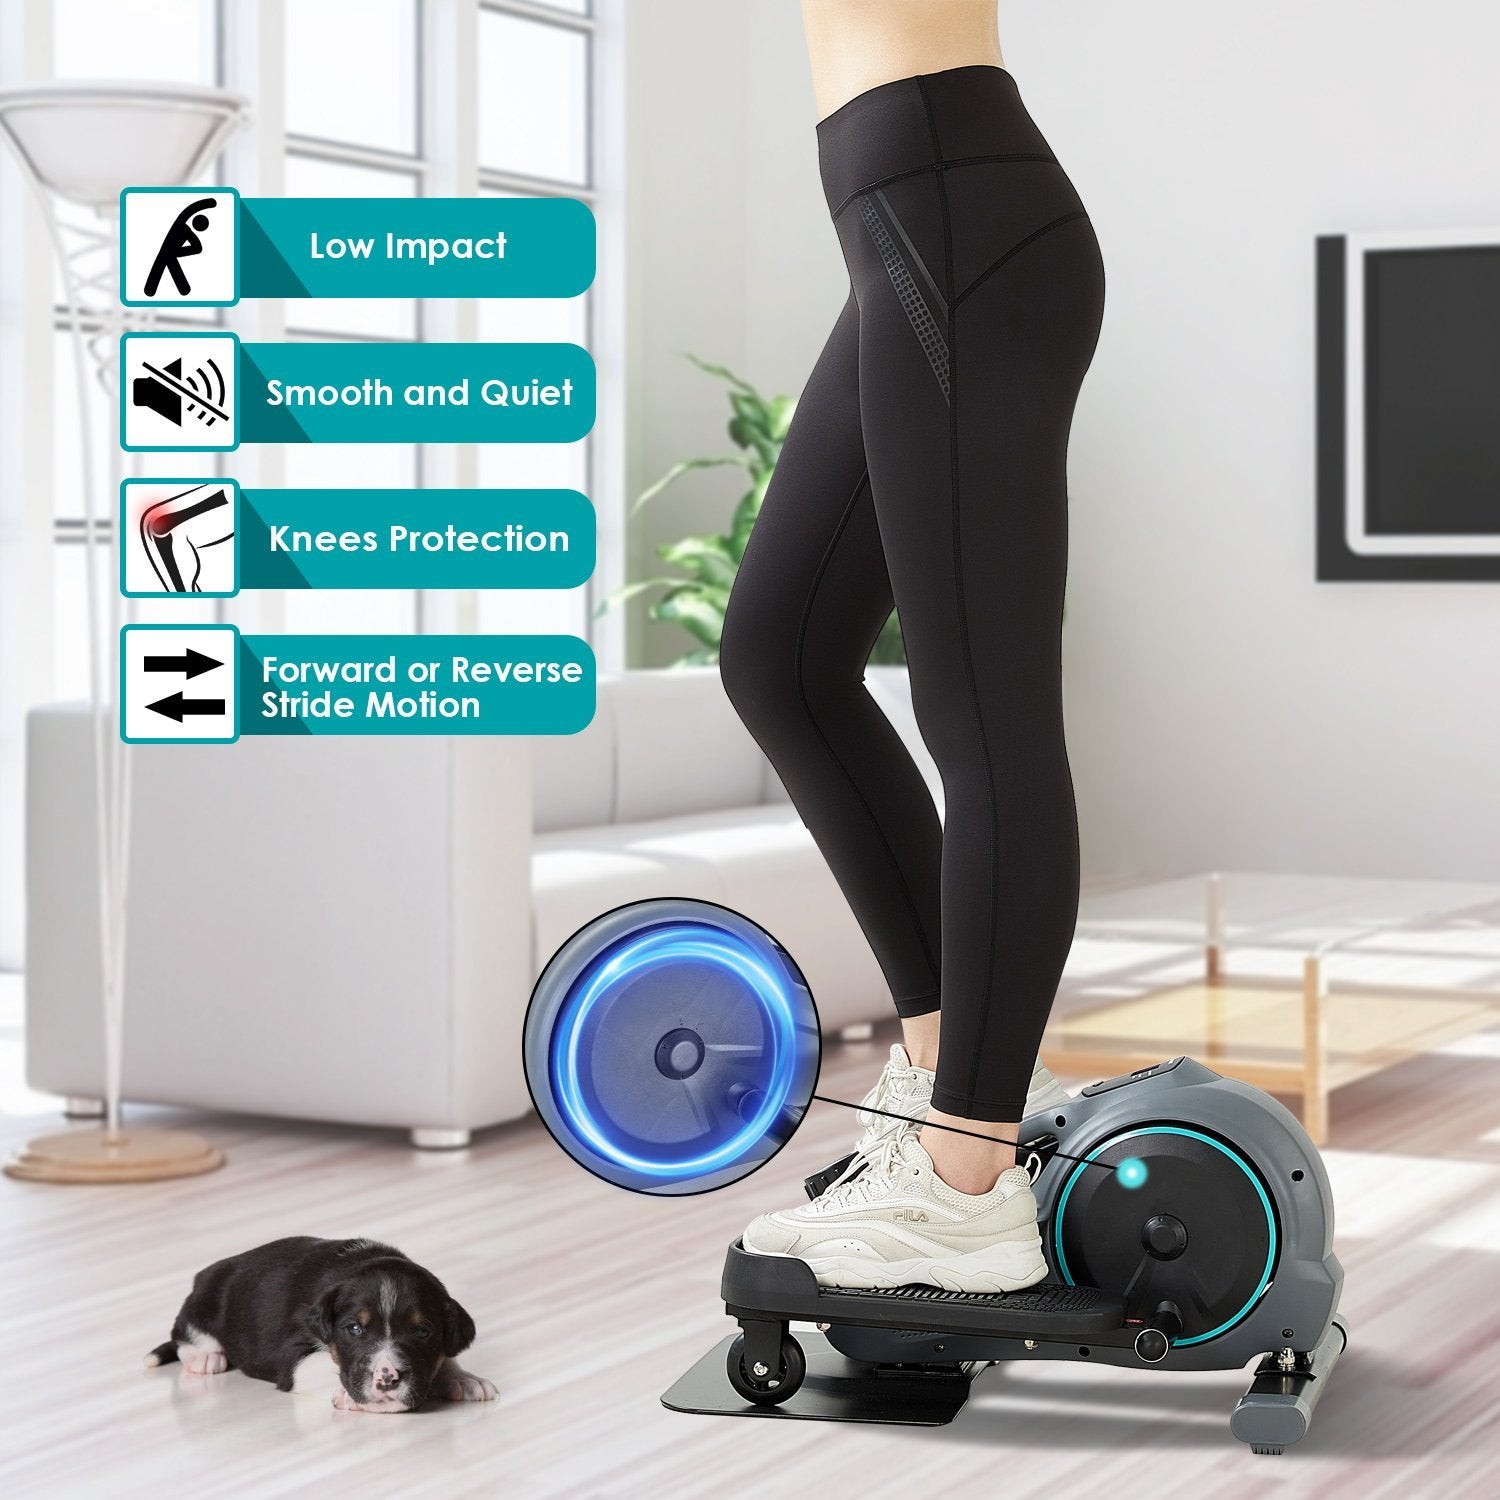 Low Impact at Home Workout Equipment - Multifunctional Exerciser